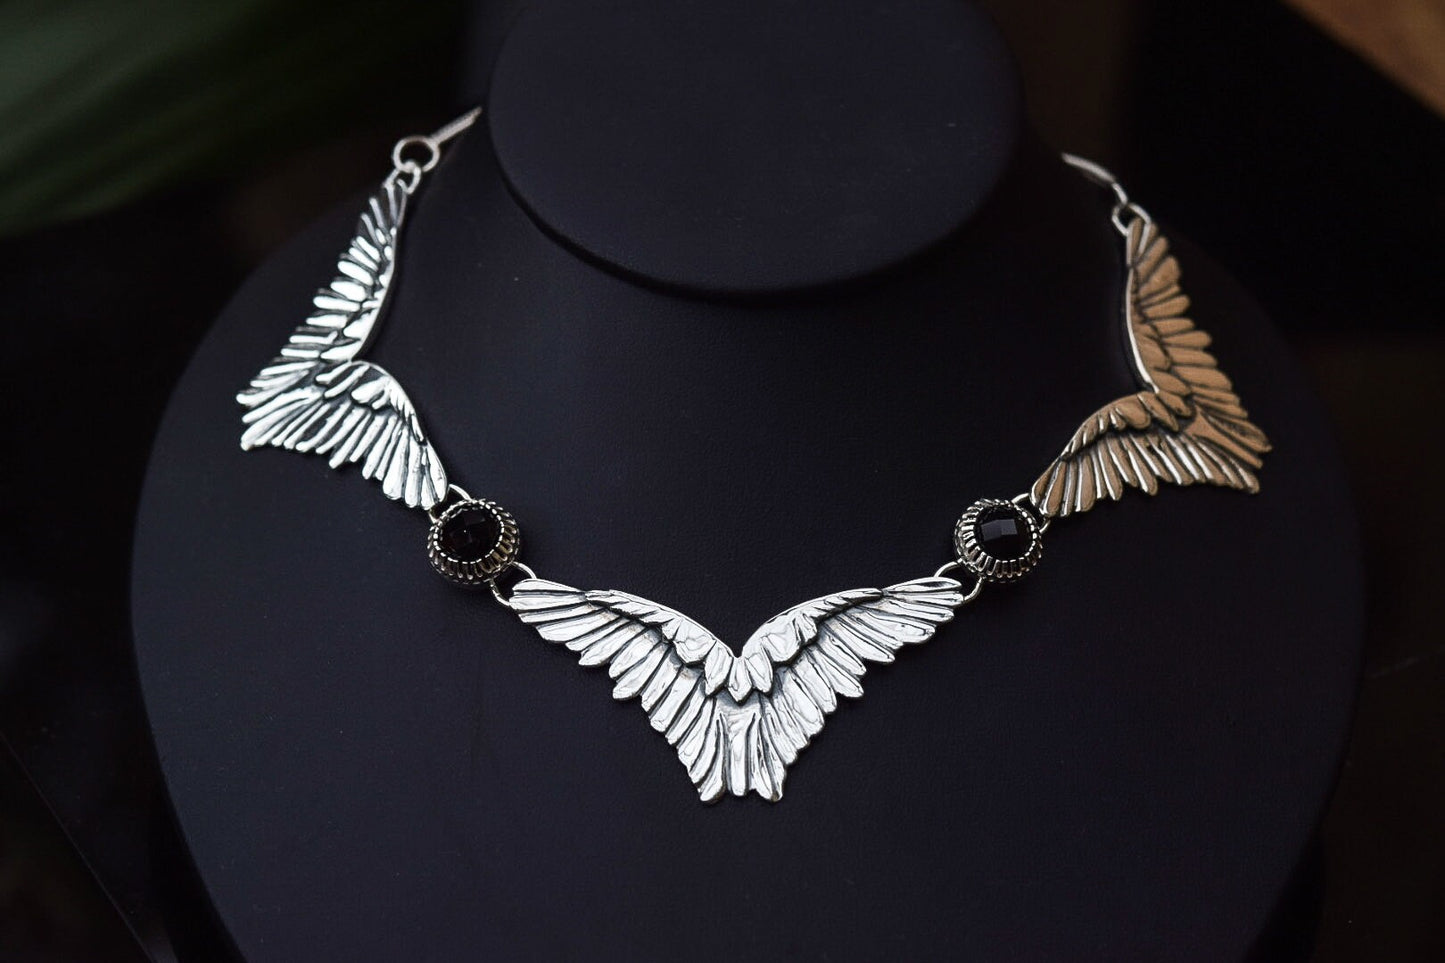 Large Wing Collar Necklace/ Black Onyx/ Statement Necklace